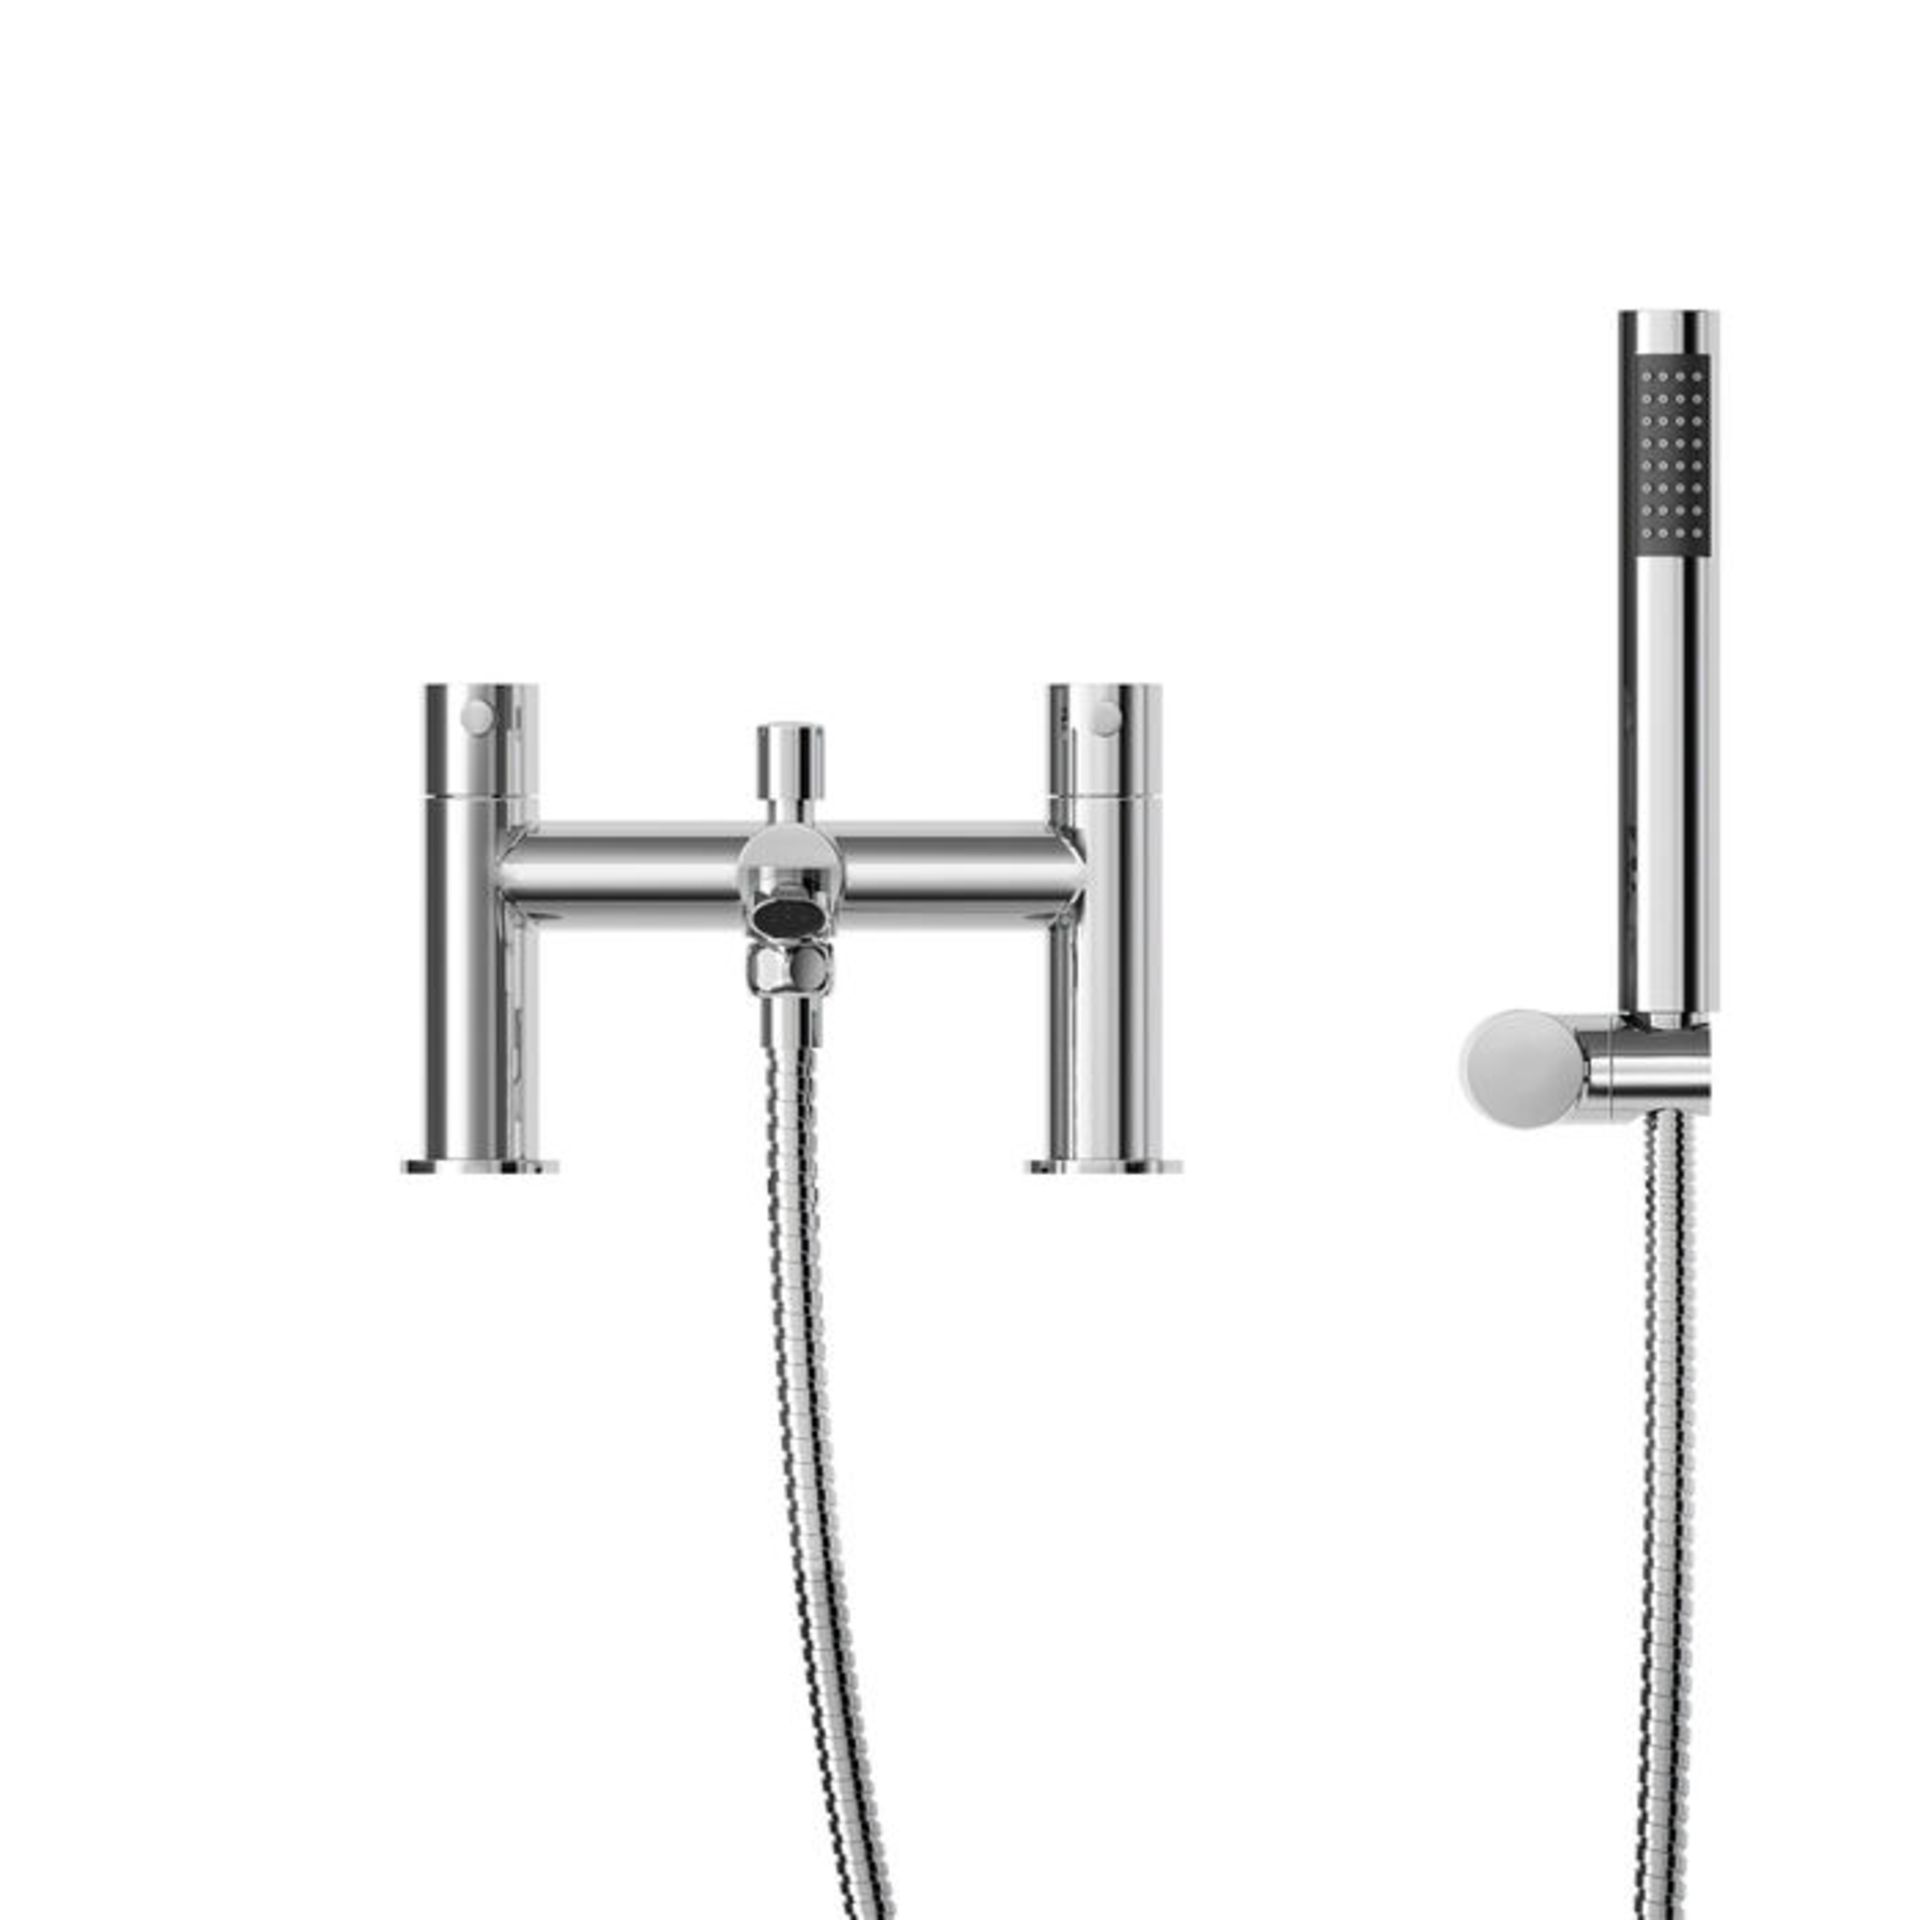 (PM1029) Bath Mixer Shower Tap & Handheld Chrome plated solid brass 1/4 turn solid brass val... - Image 2 of 2